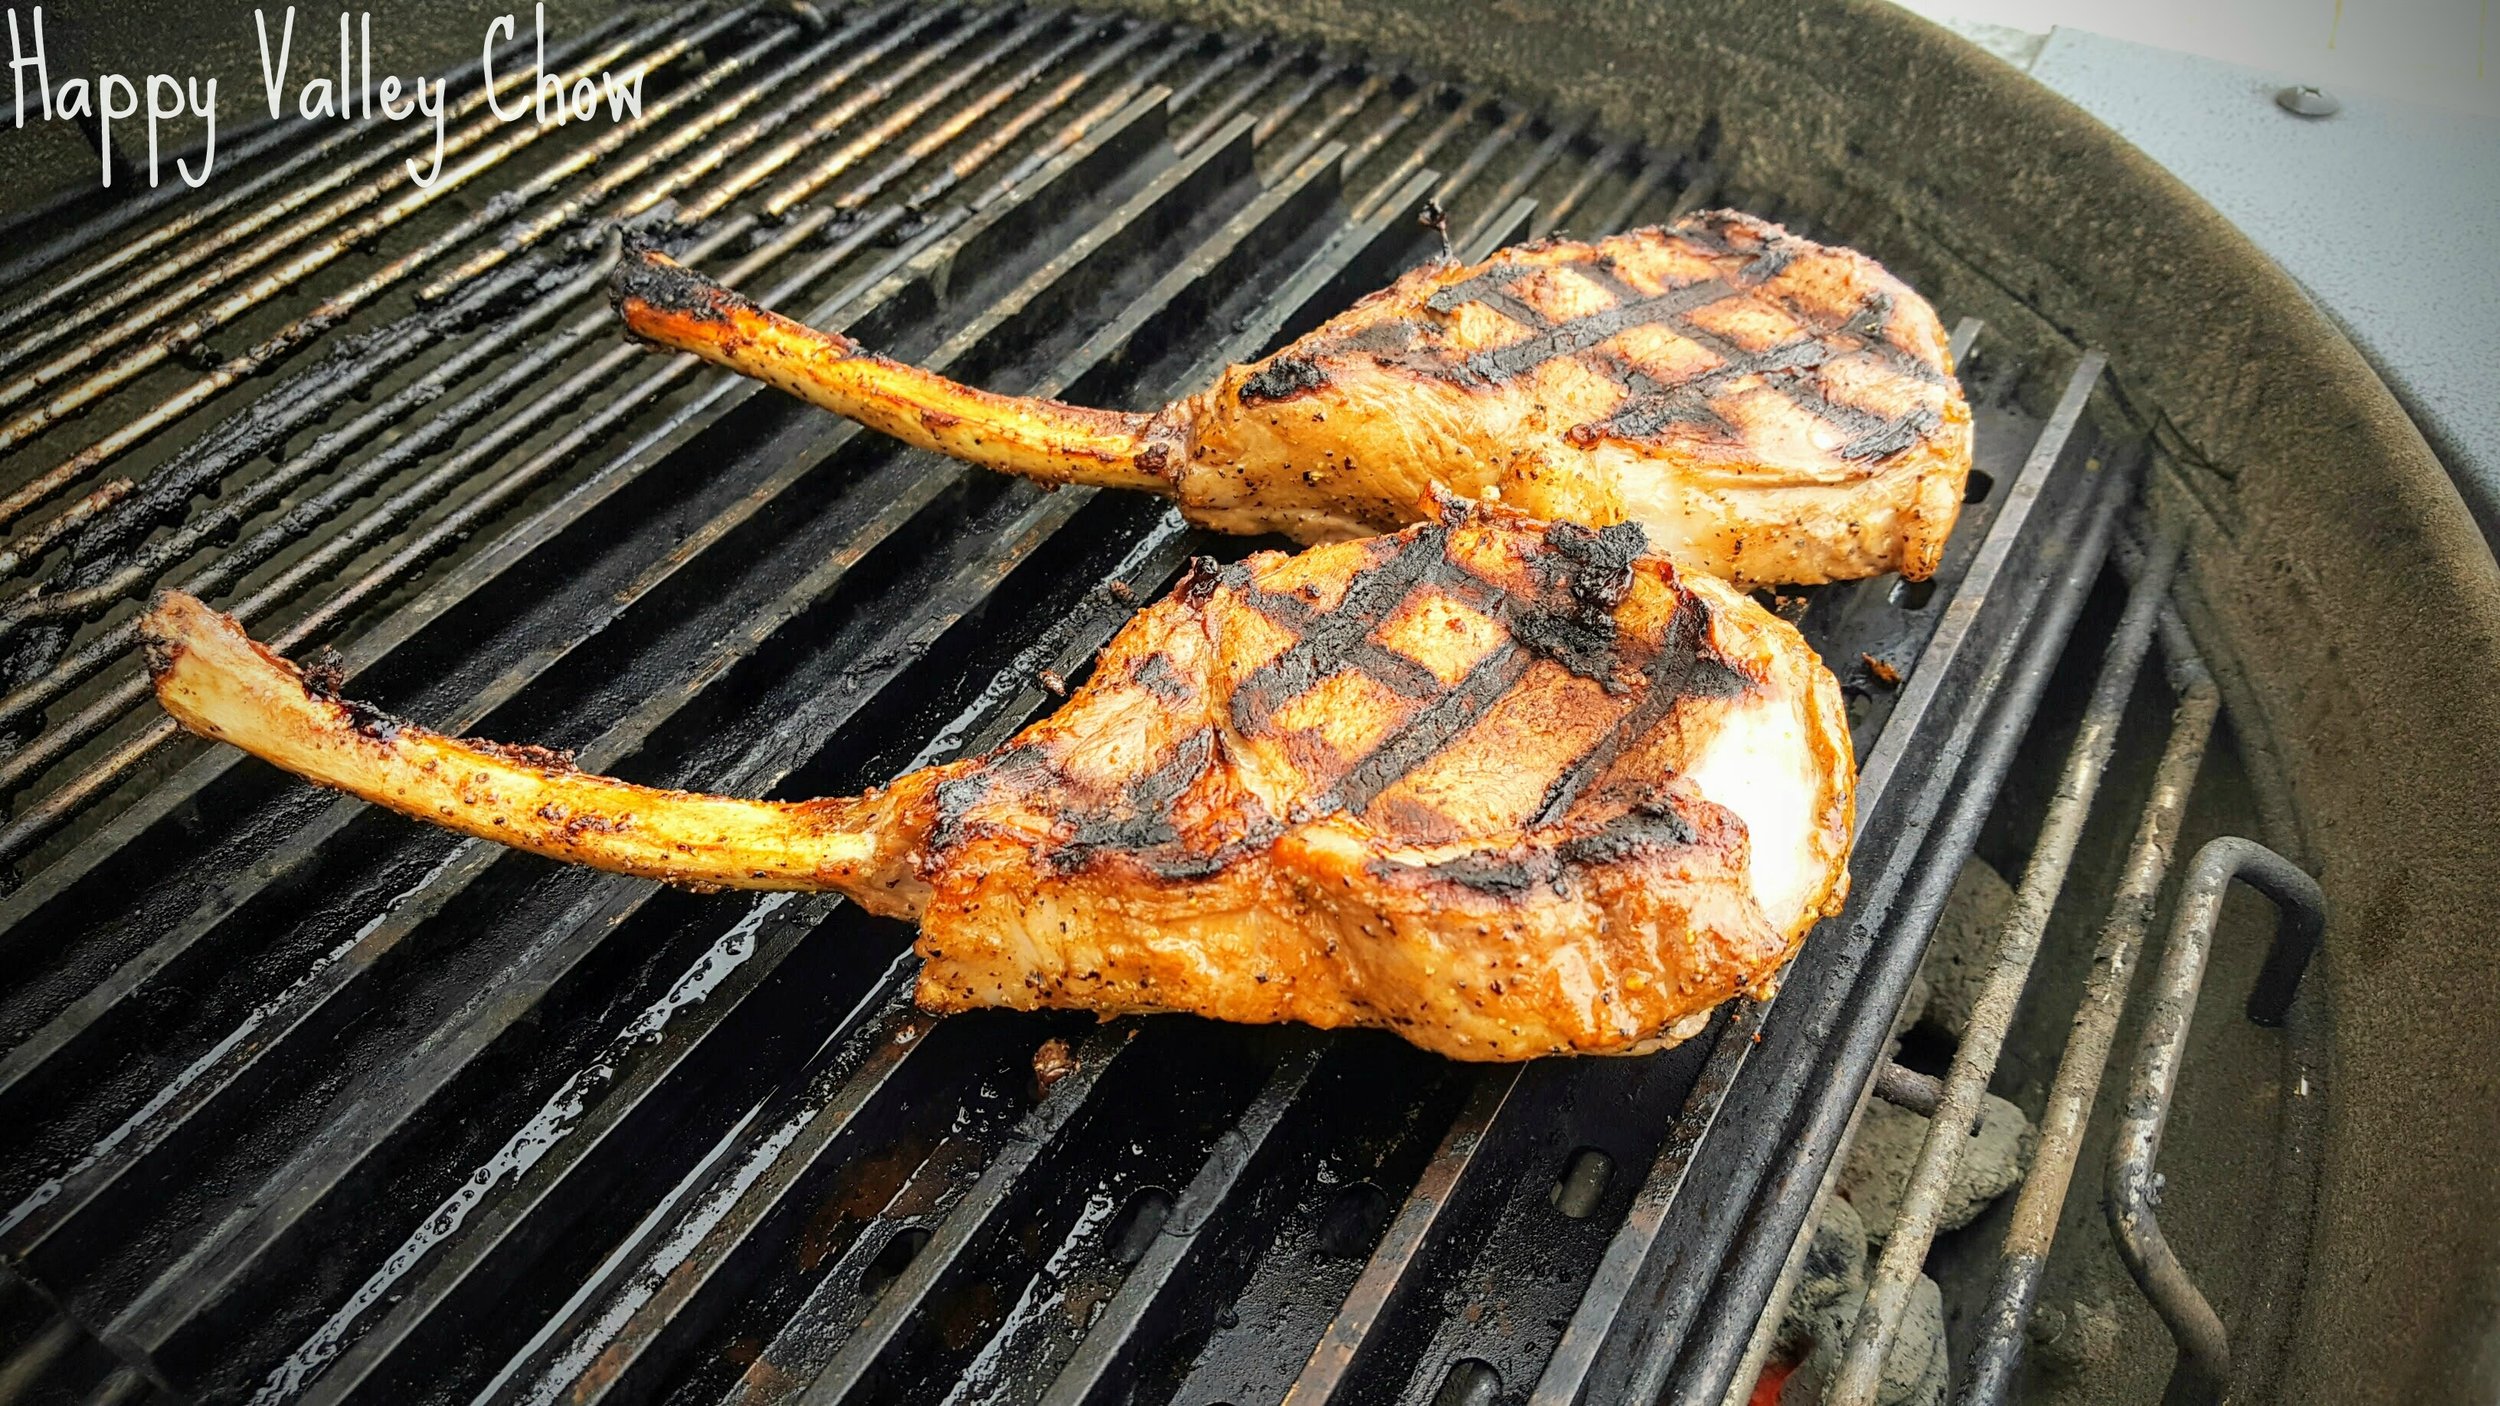 Chow Line: Meat thermometer is the best option to ensure food safety when grilling  meat